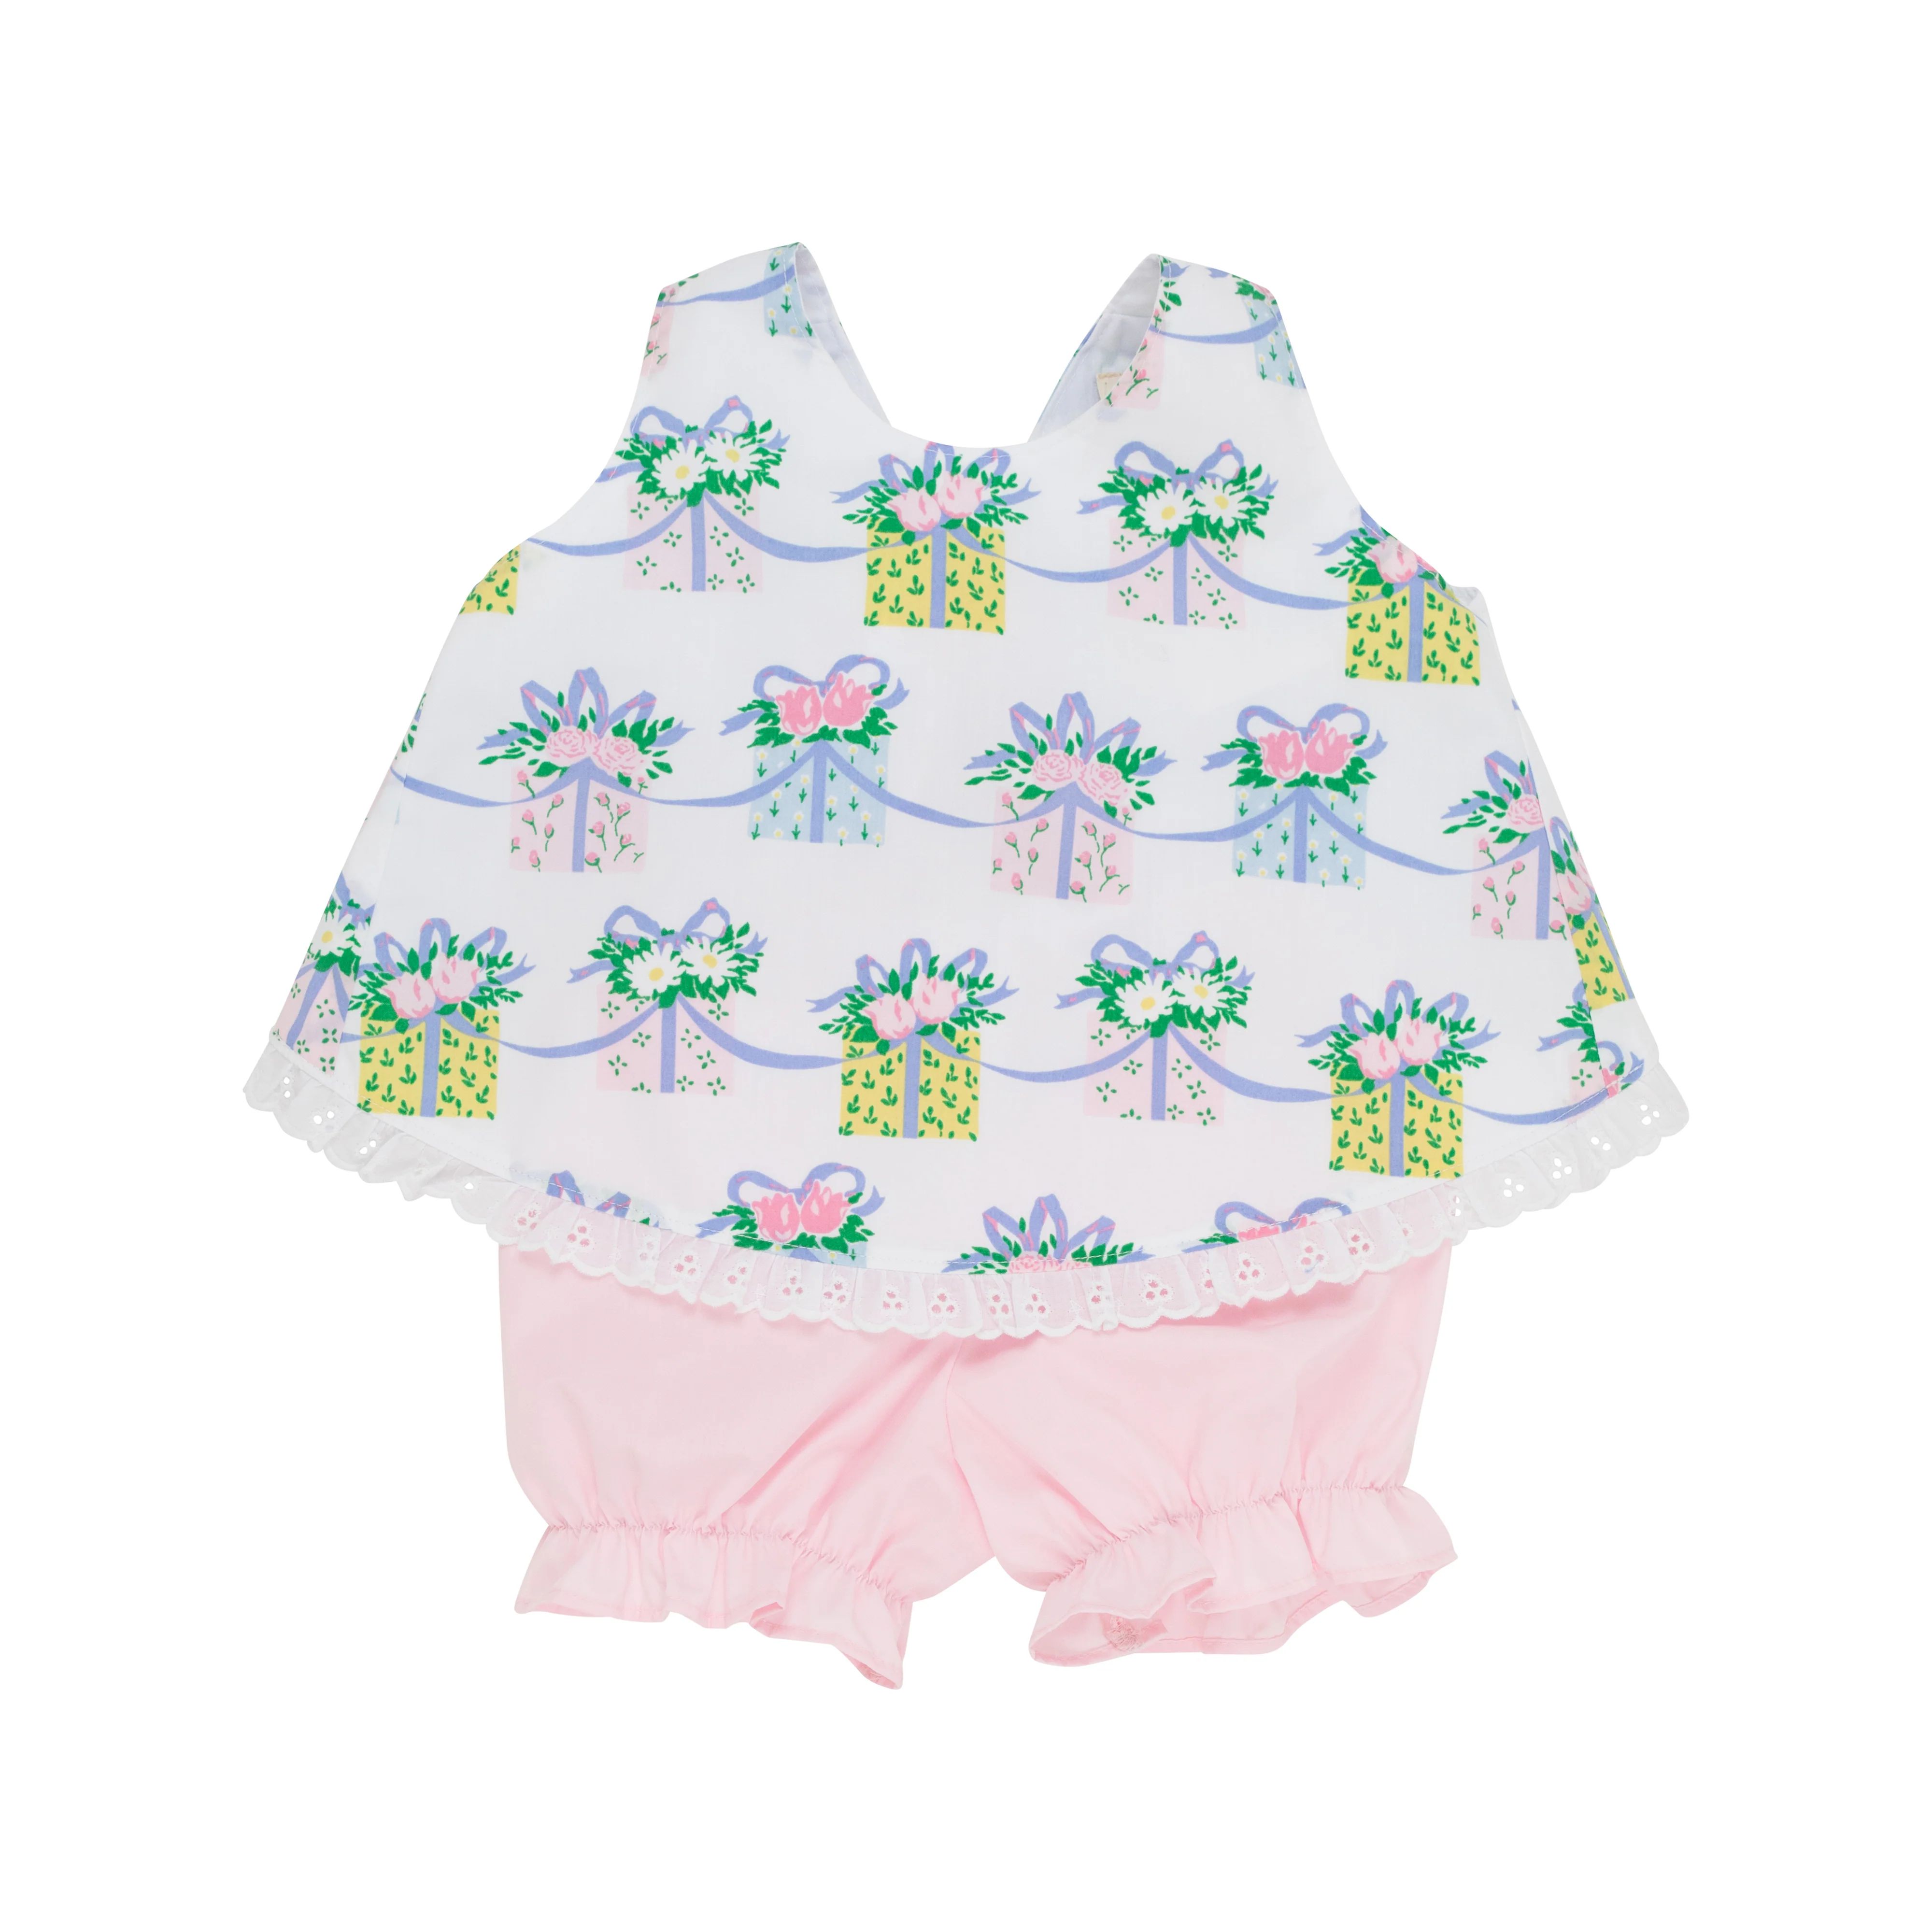 Susy Swing Top Set - Every Day is a Gift with Palm Beach Pink | The Beaufort Bonnet Company